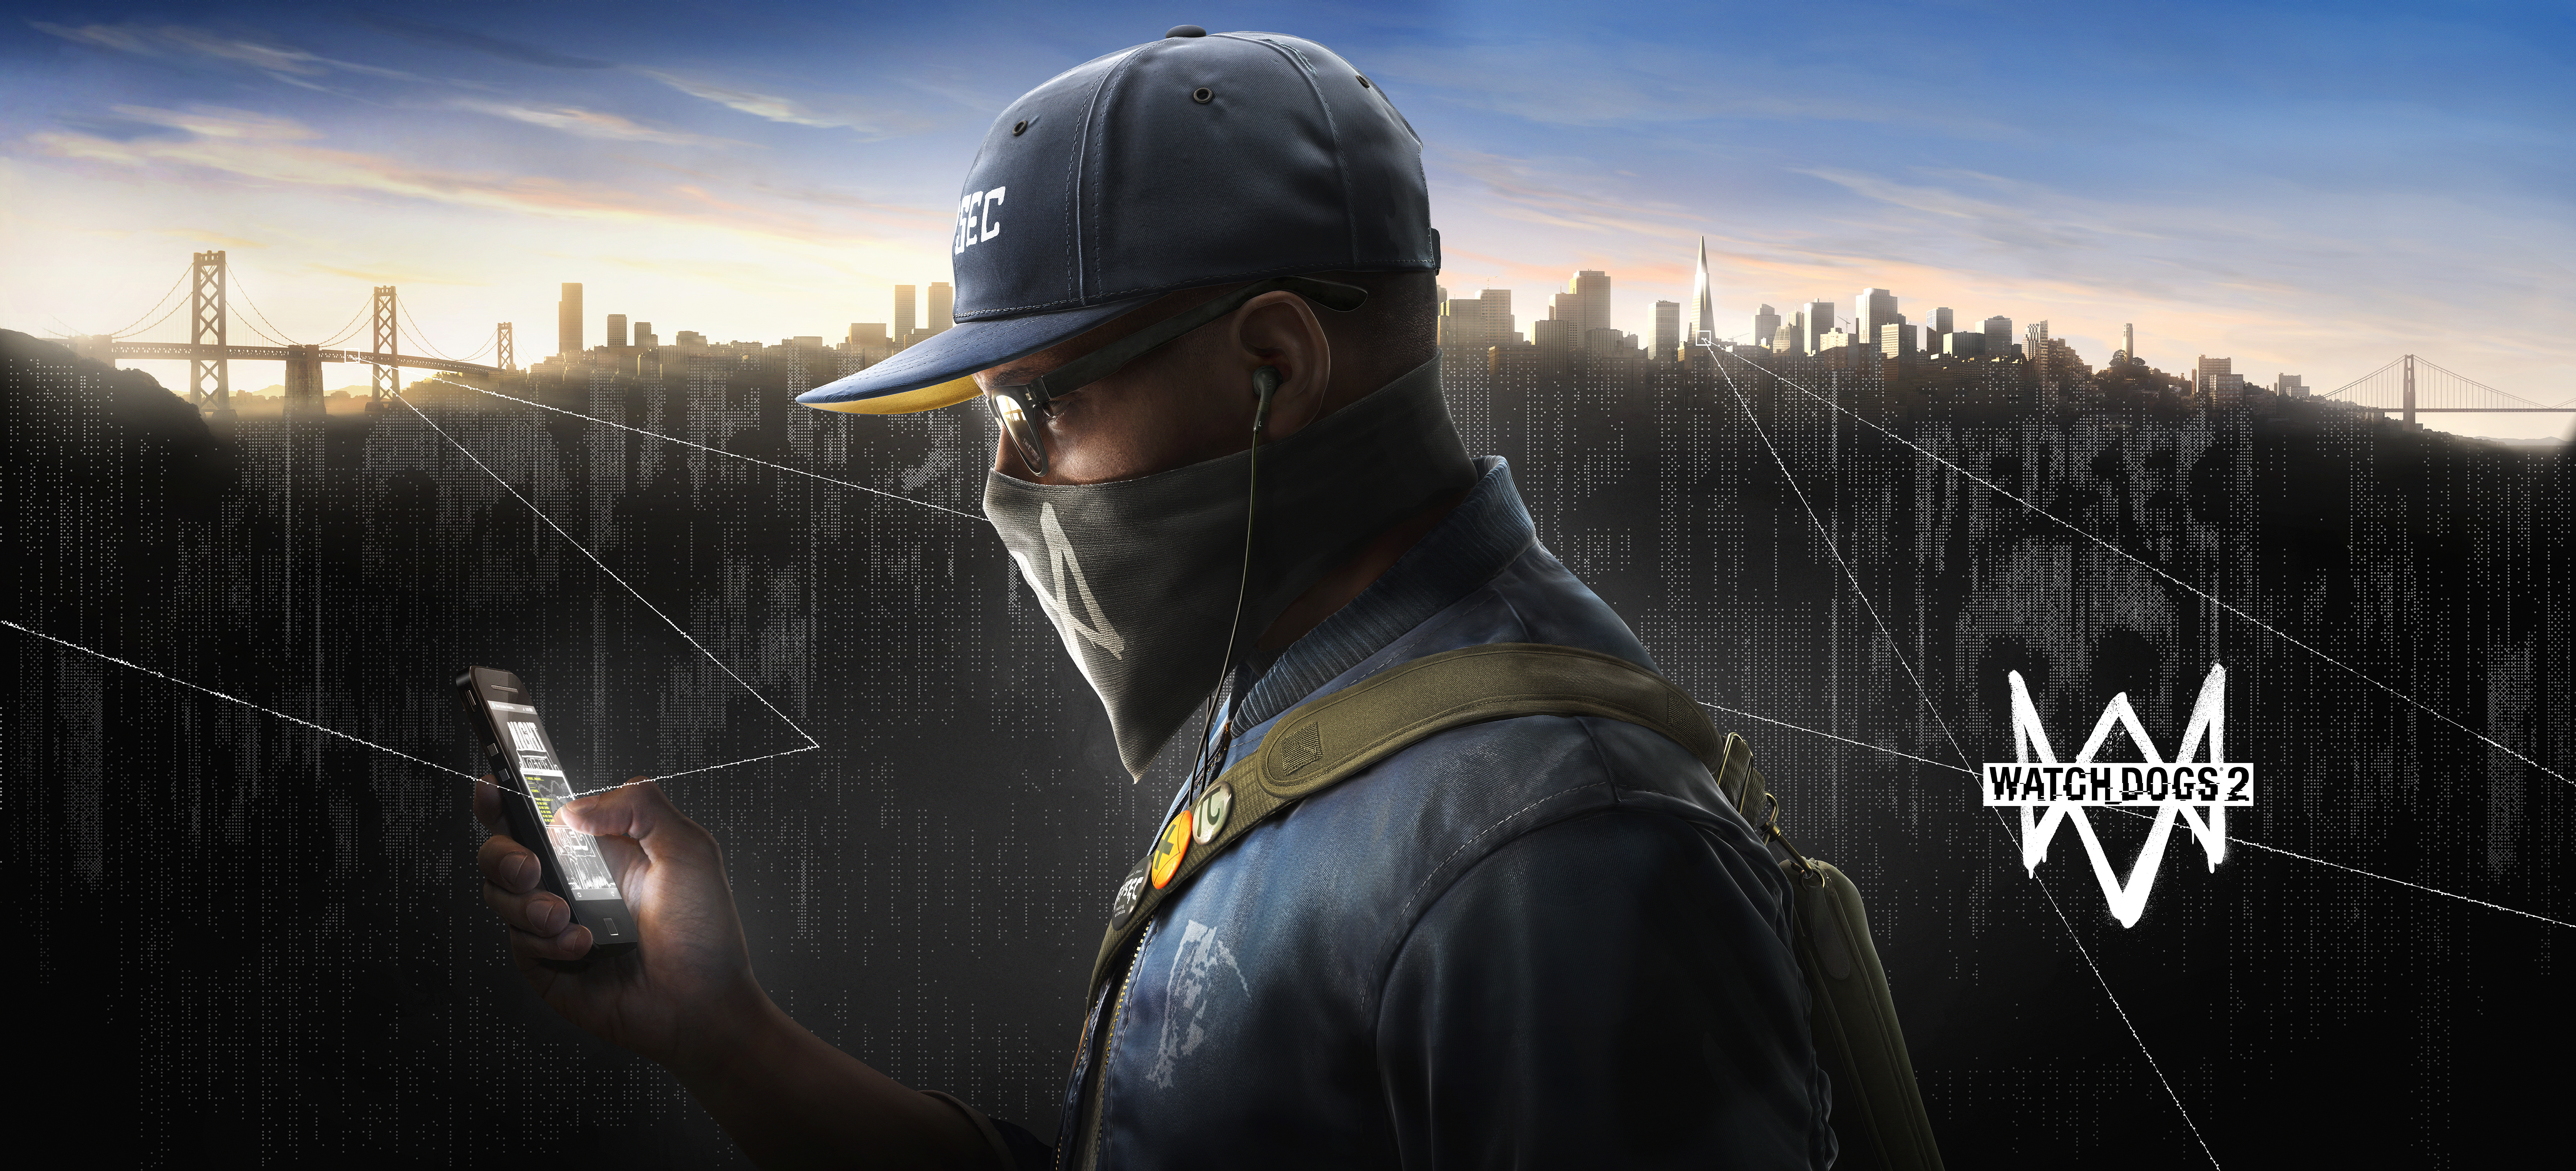 Watch dogs hd papers and backgrounds